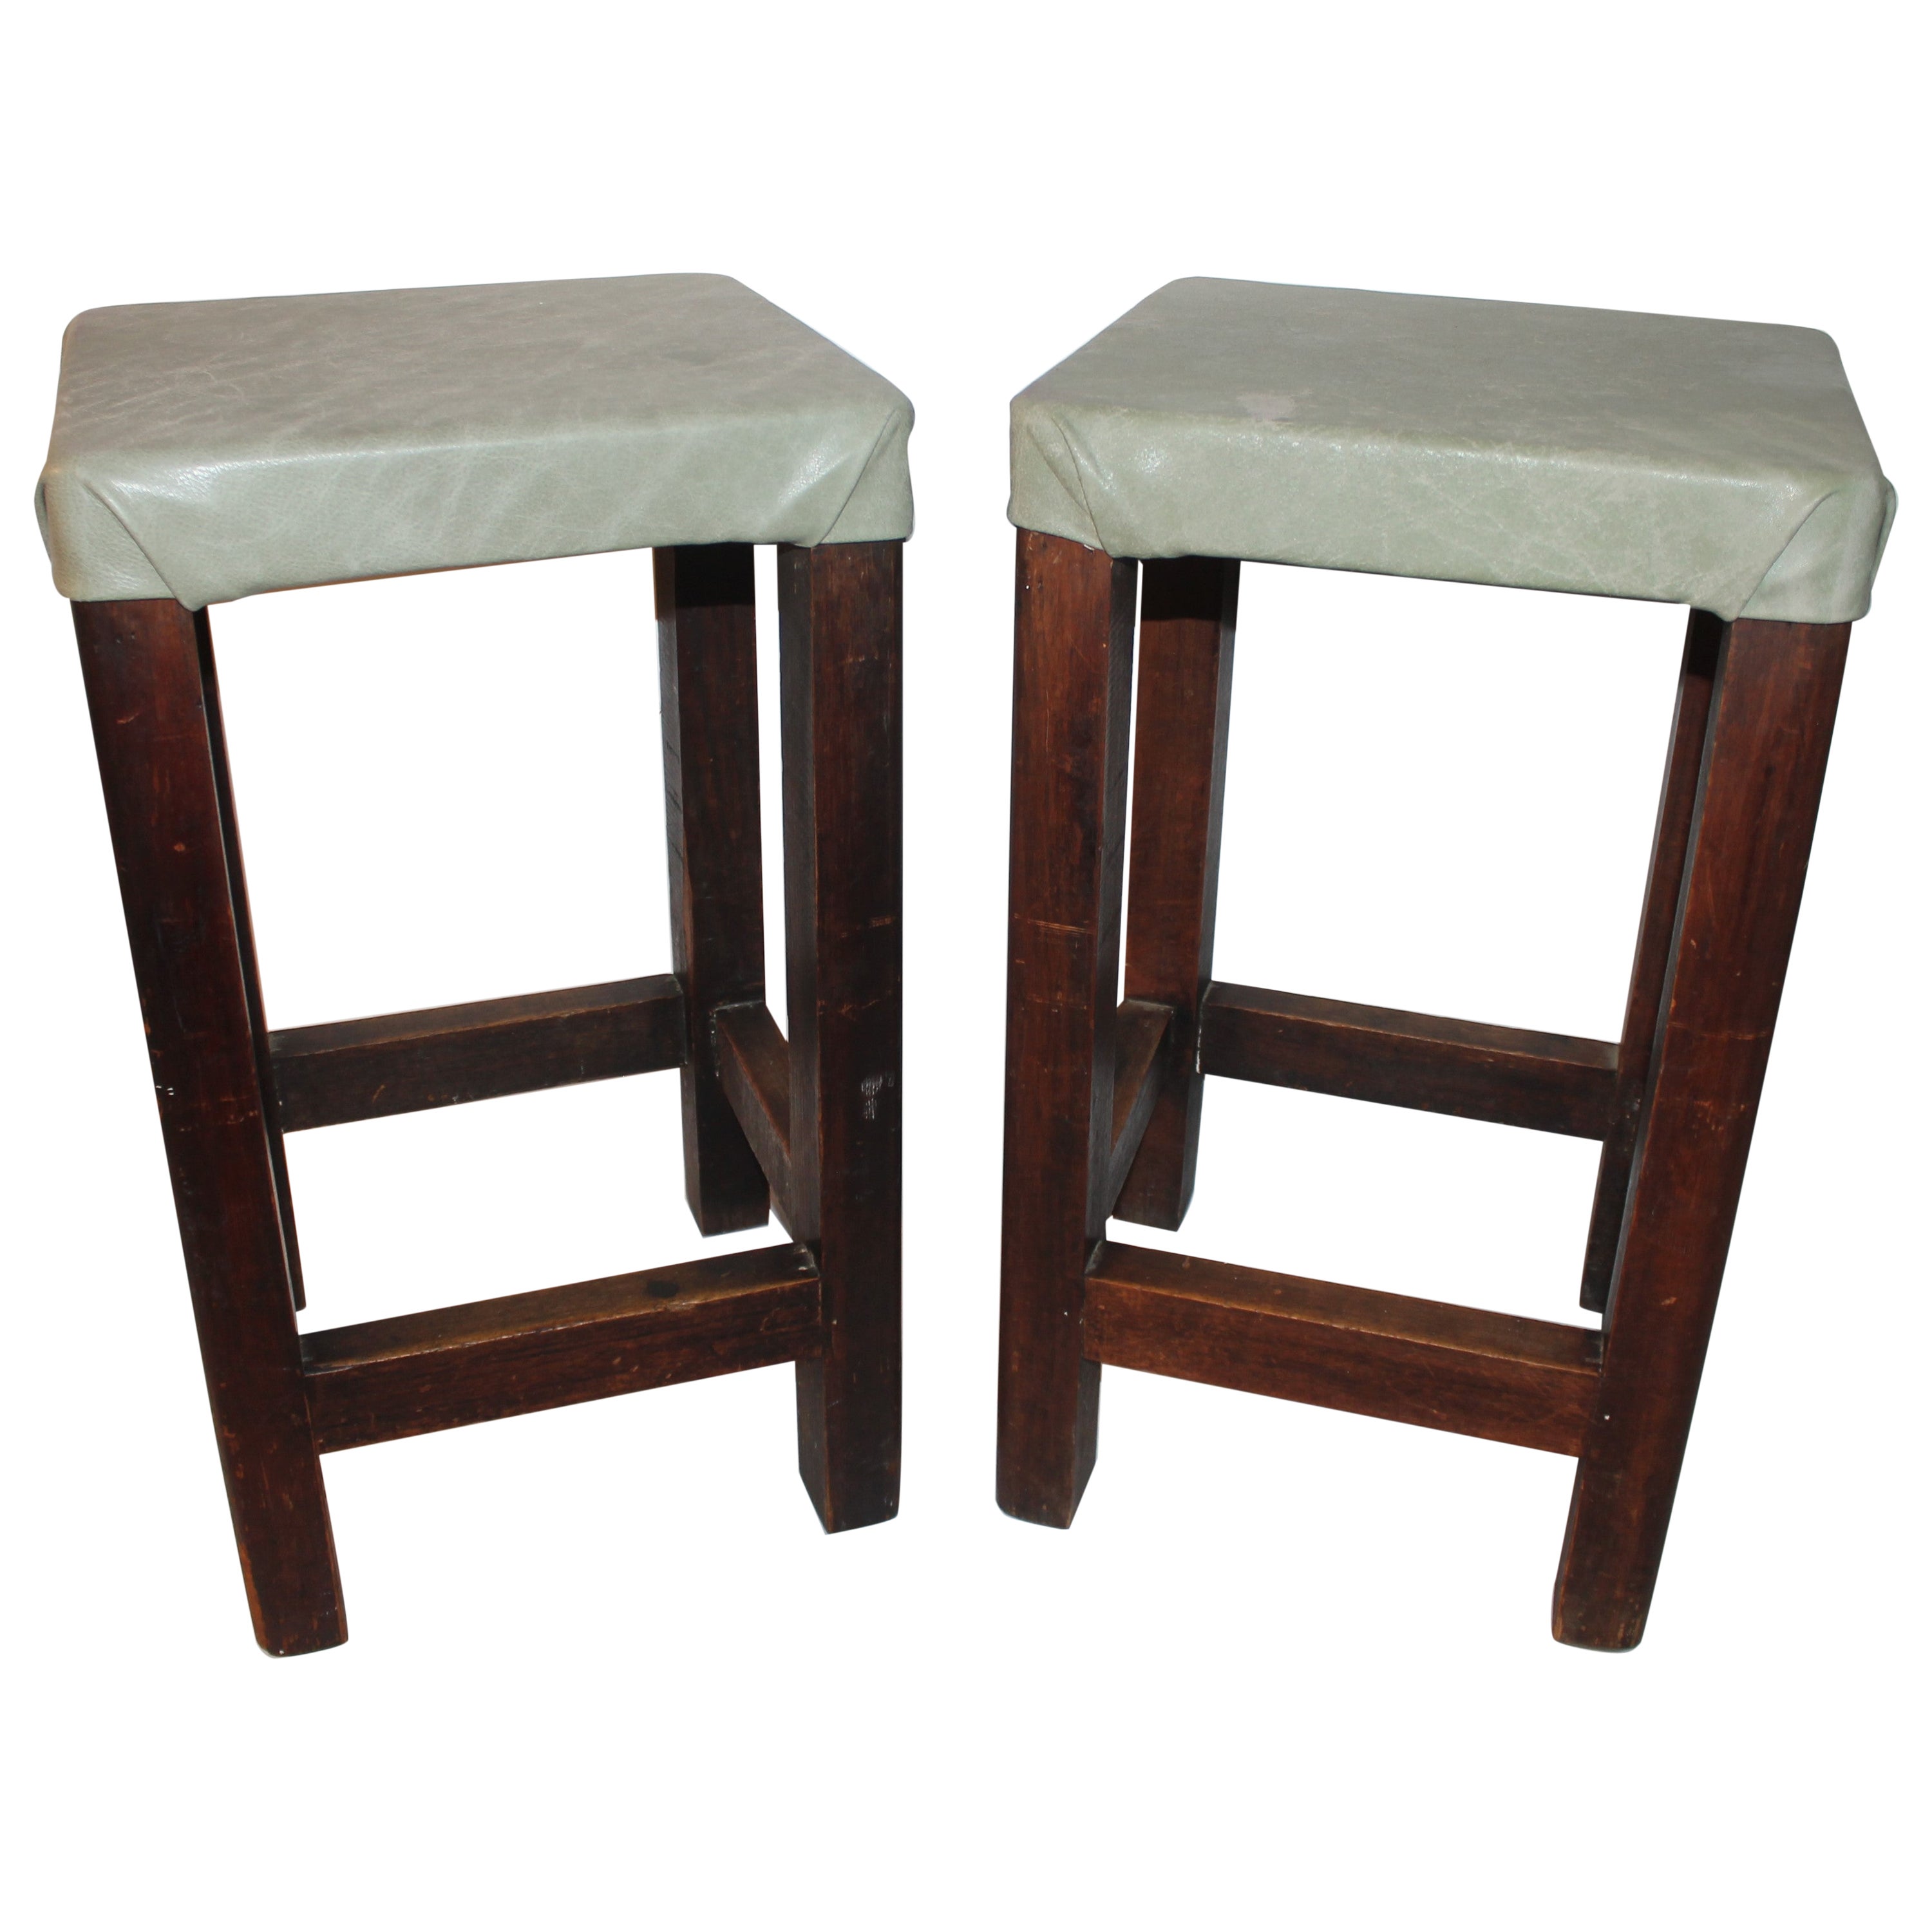 Pair of Barstools with Sage Green Leather Seats